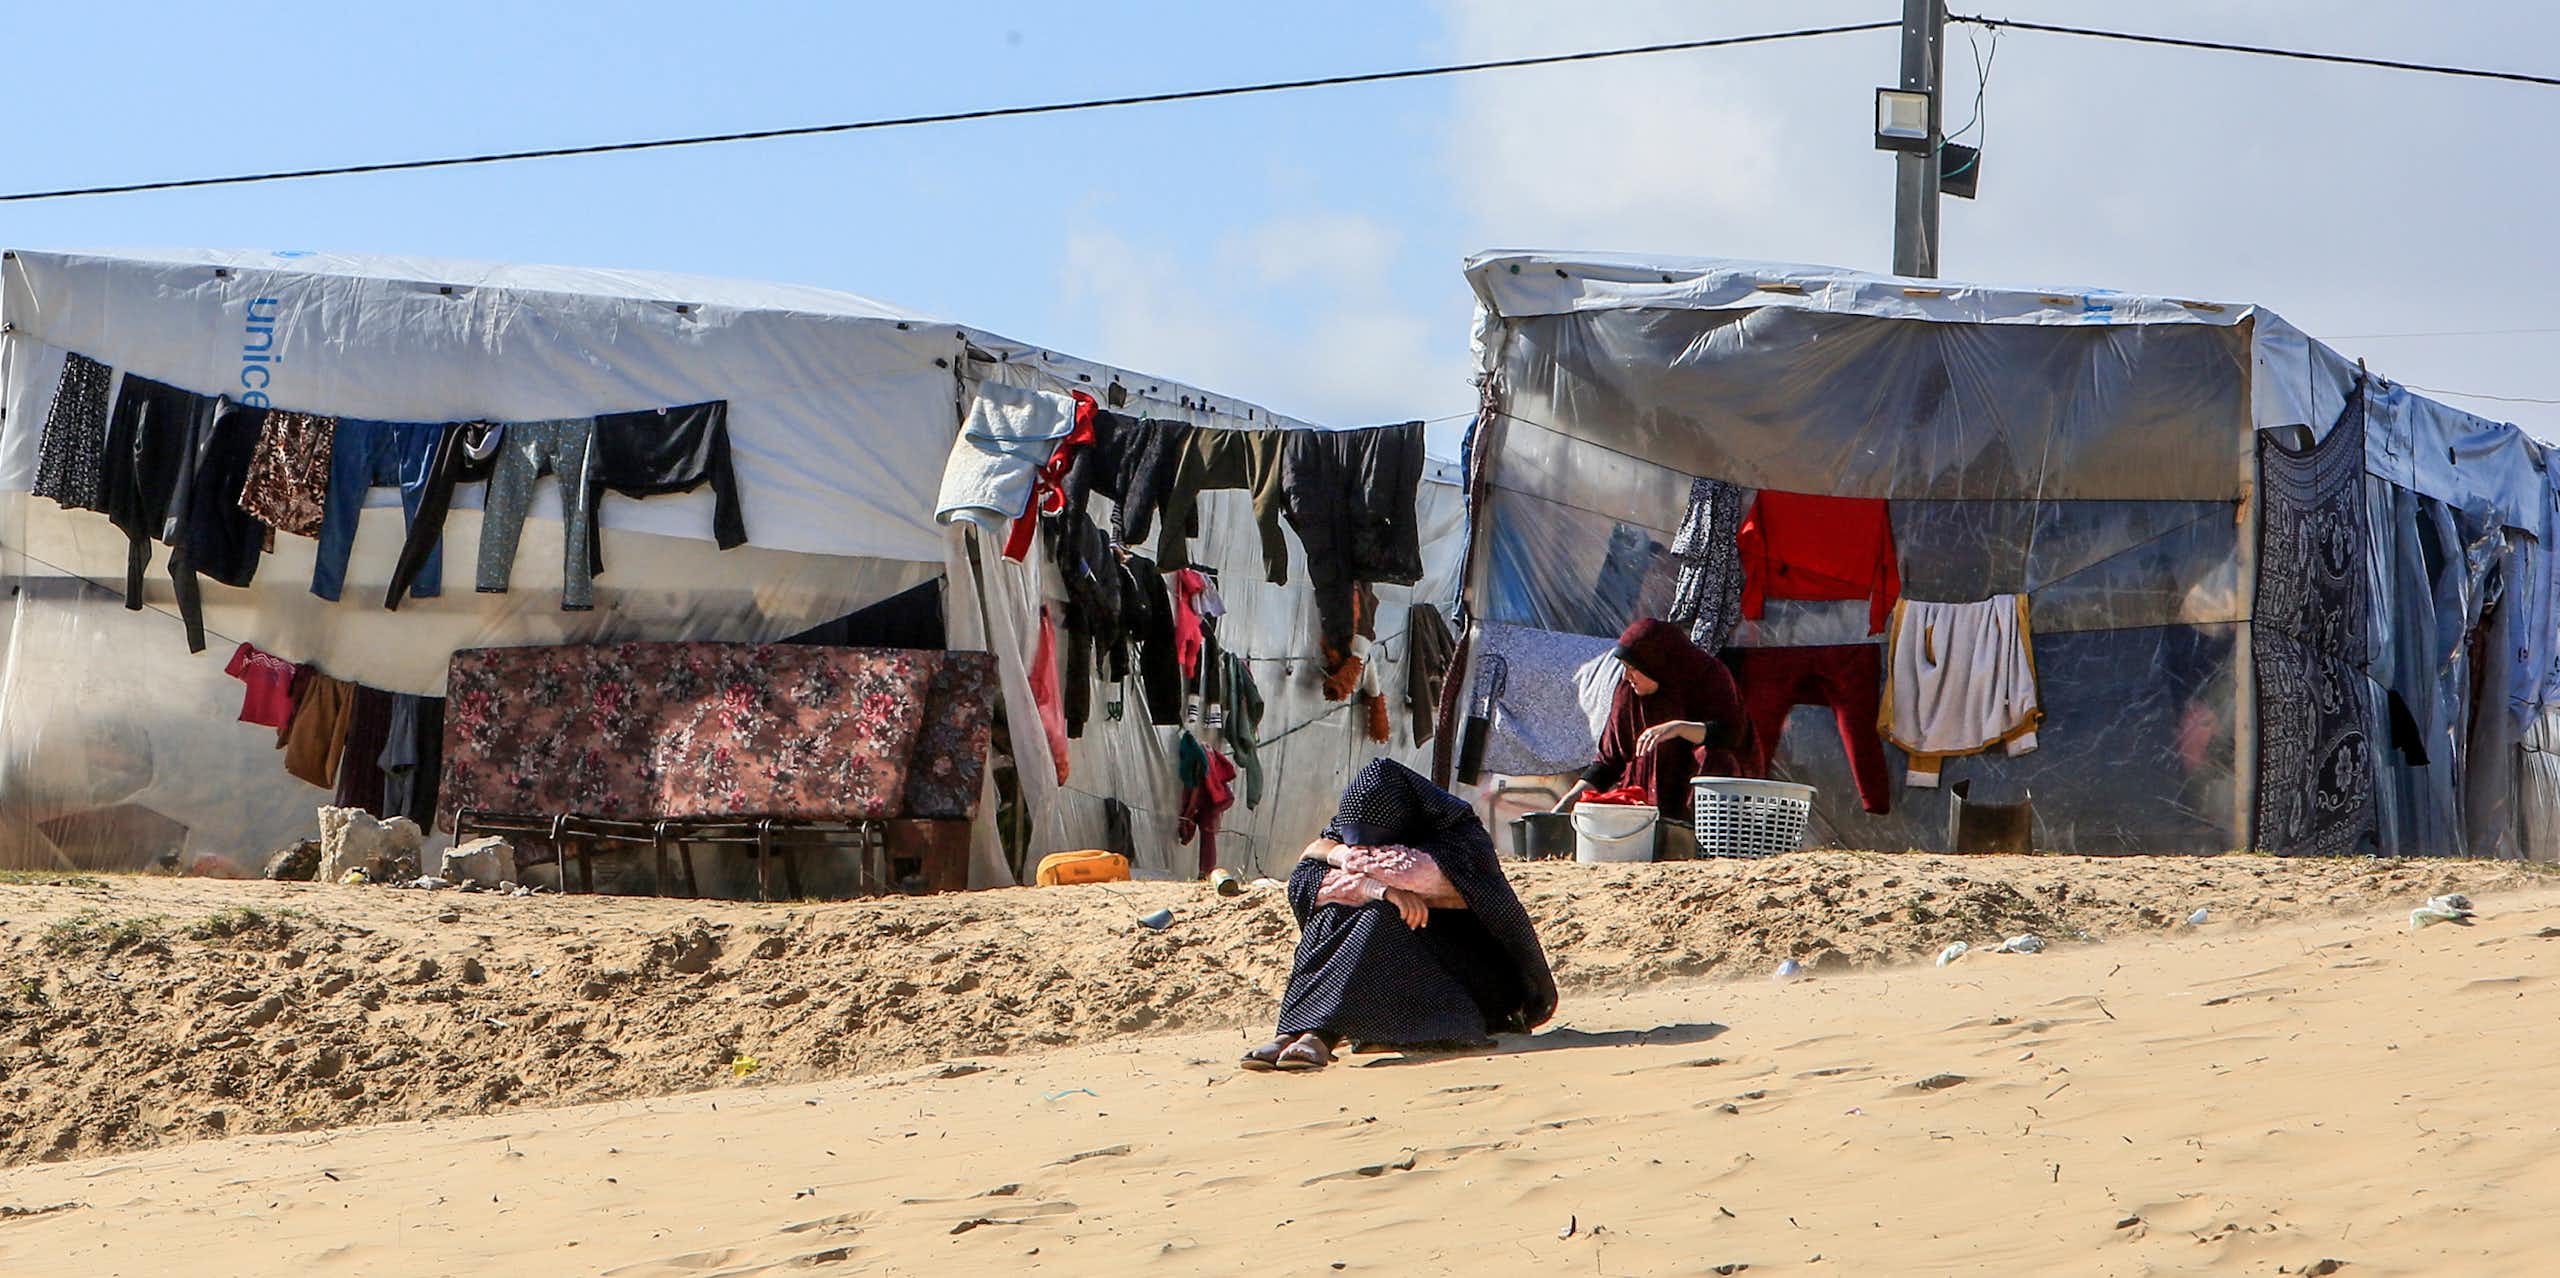 A woman sits on the ground with her head on her knees, with a makeshift tent and clothes drying on a line in the background.